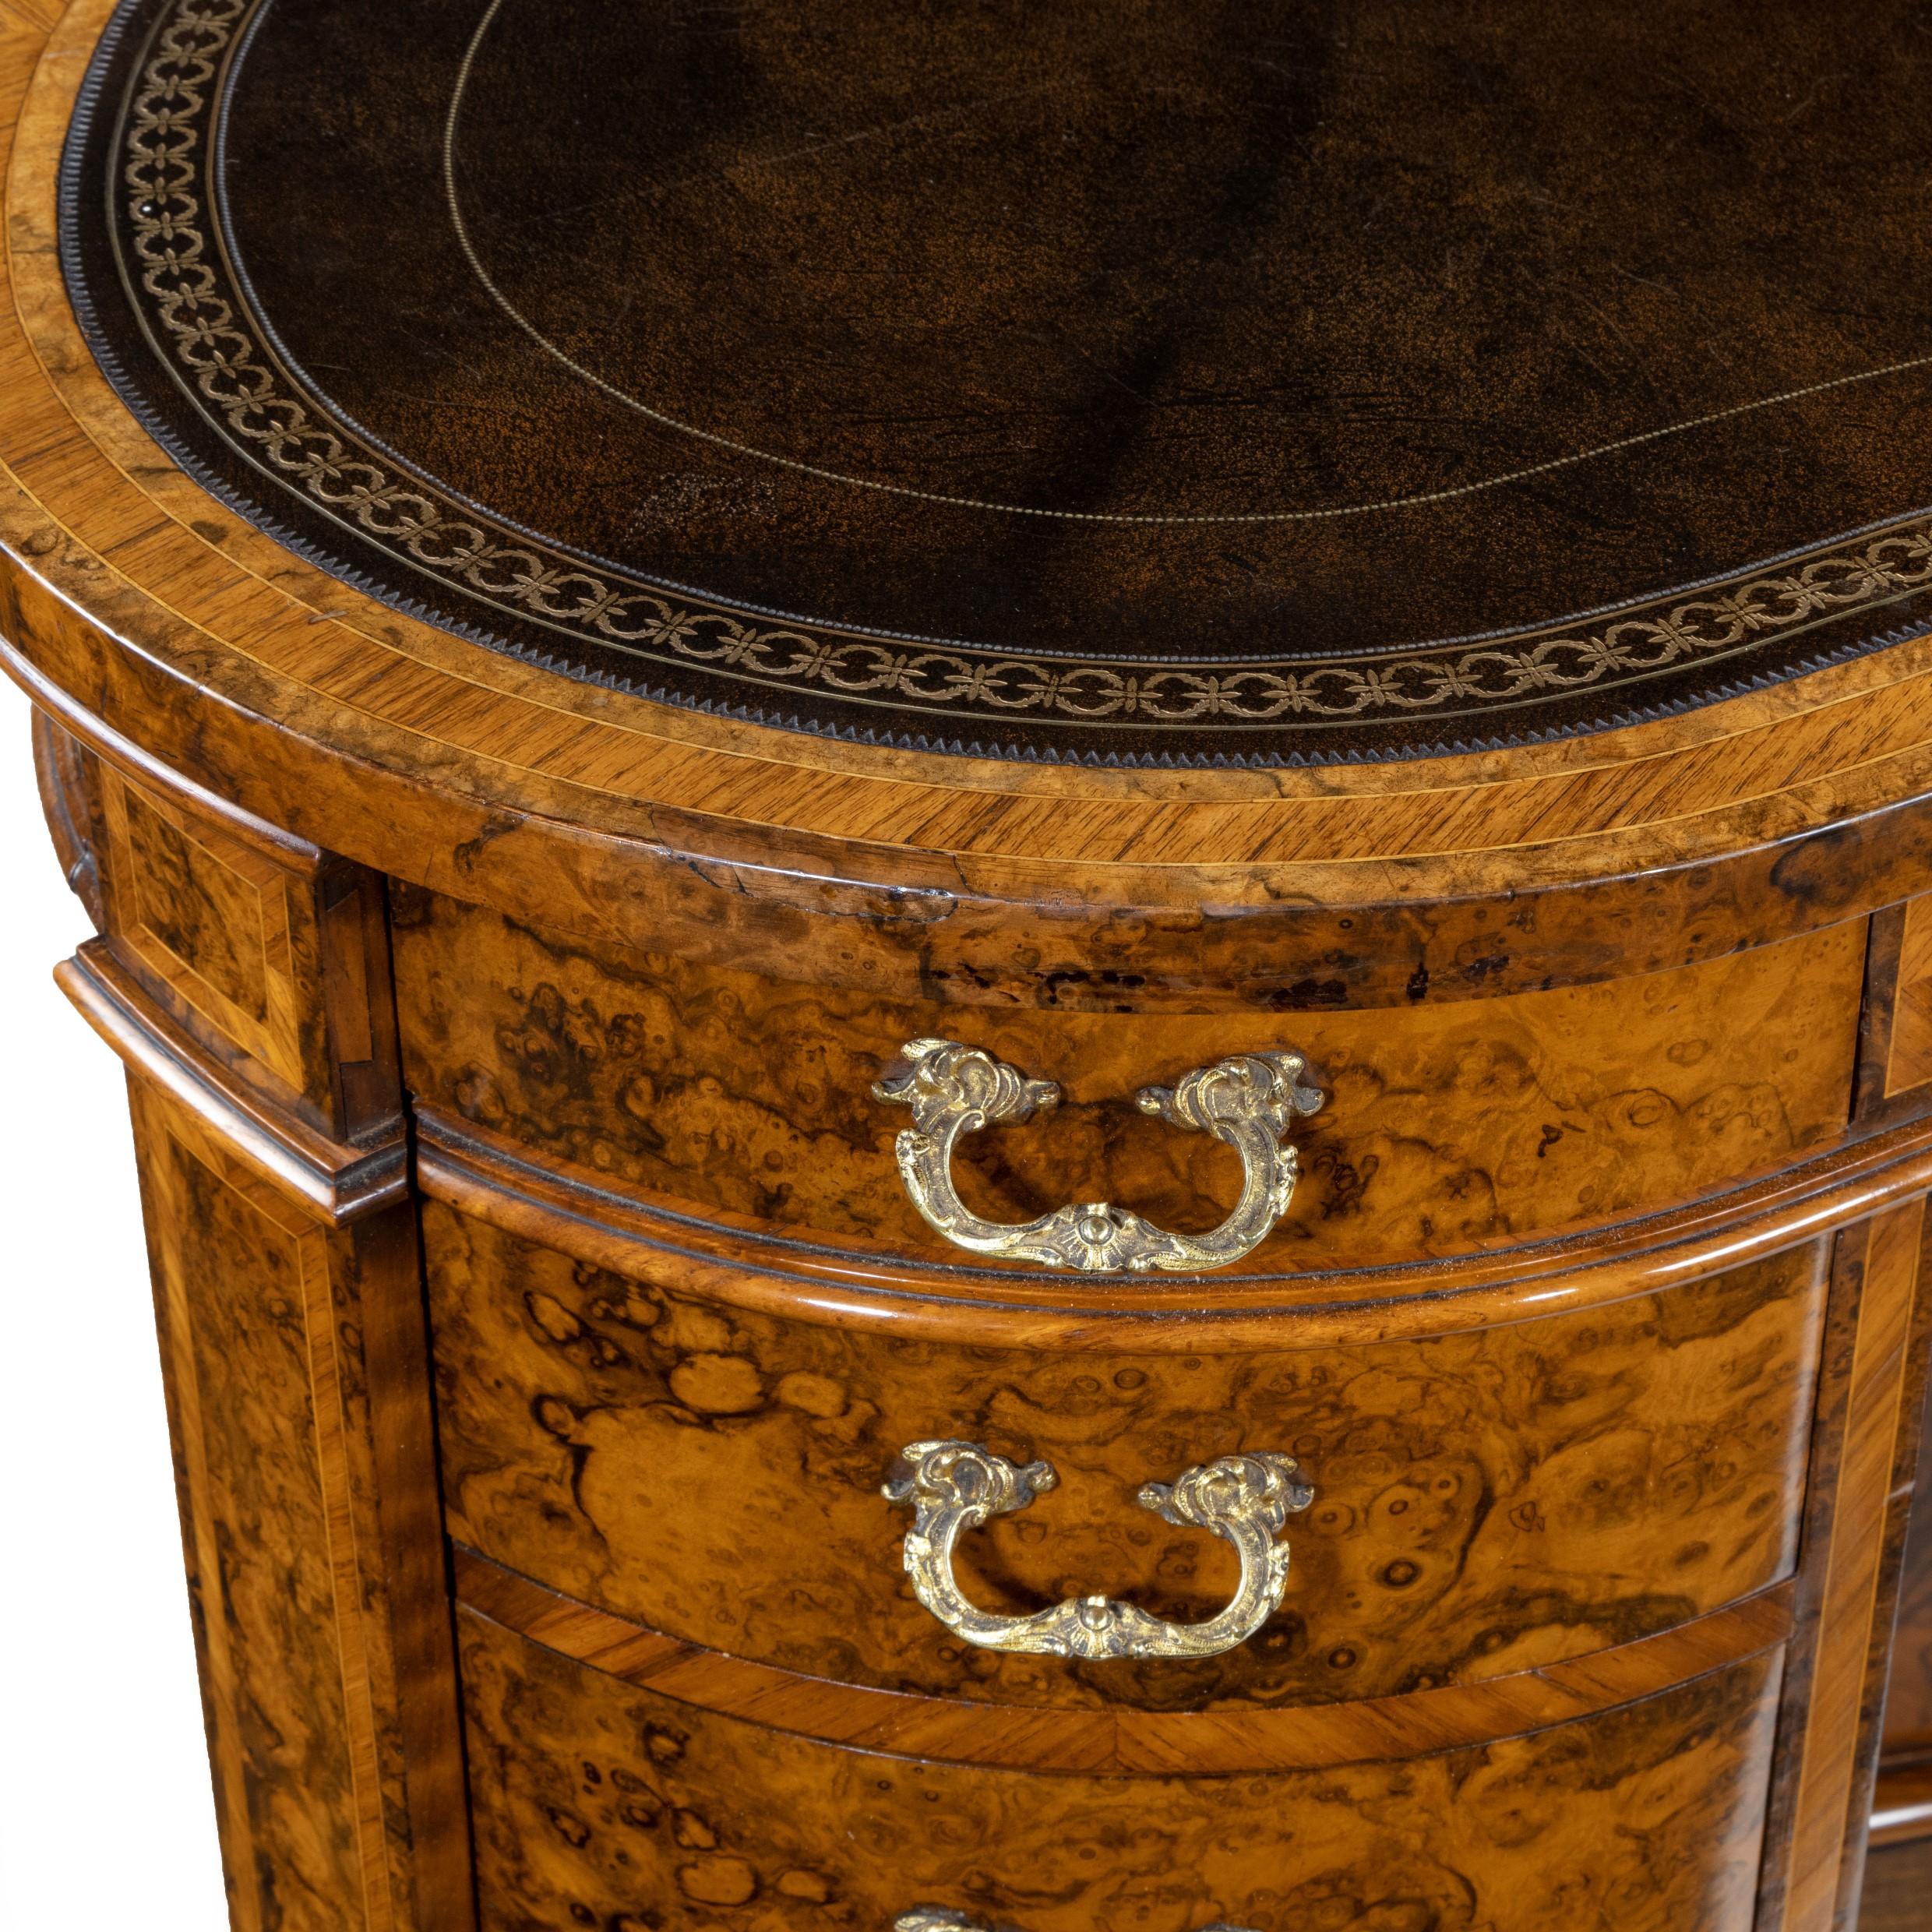 A fine quality Victorian kidney-shaped desk in richly figured burr walnut by Gillows, the leather-inset top, above three drawers in the frieze and four graduated drawers in each pedestal, each with original gilt brass handles, the sides lock by